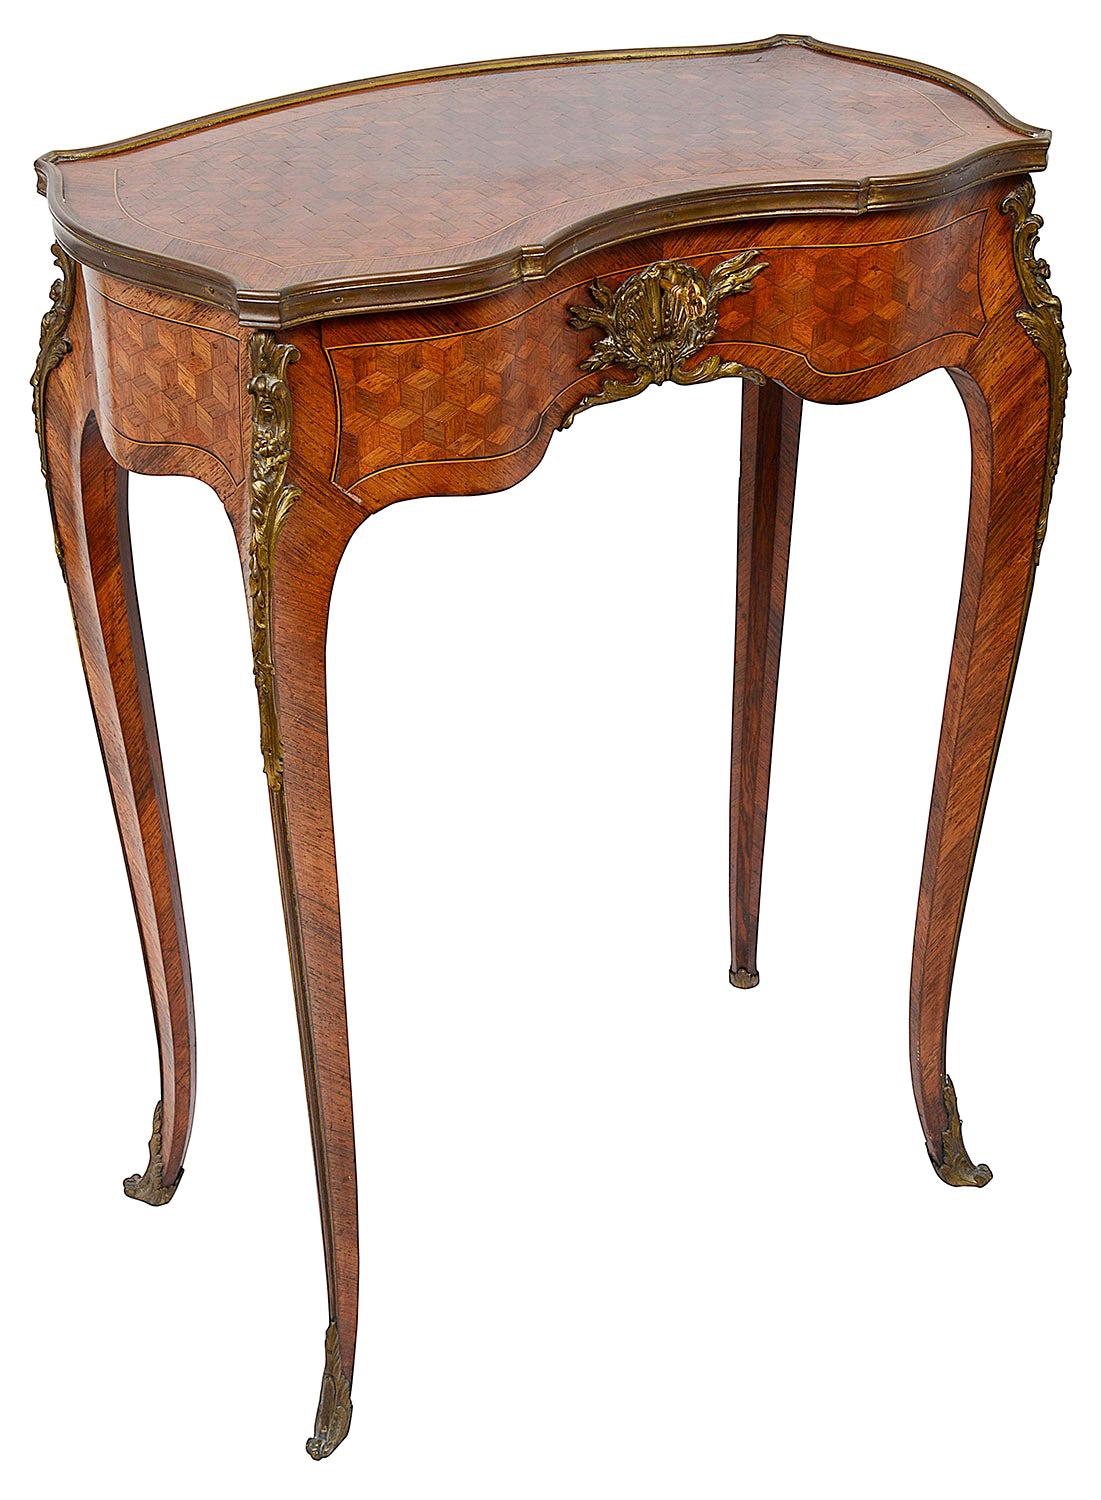 19th Century Parquetry Inlaid Side Table, Signed, Linke